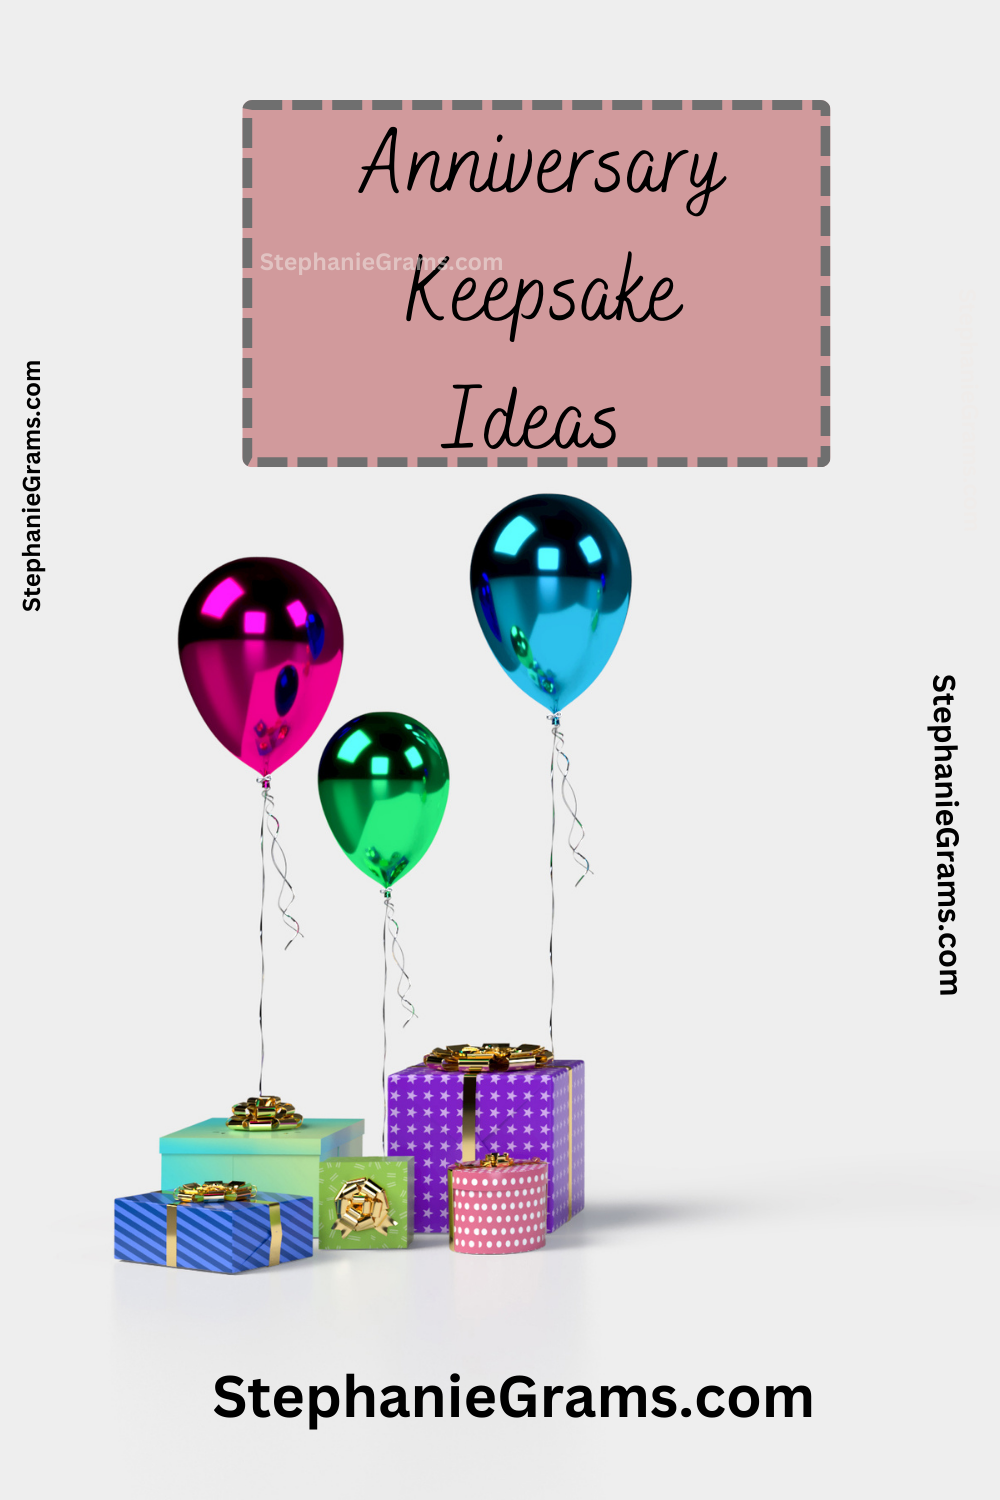 Keepsake Workshops for Connecting with Your Community